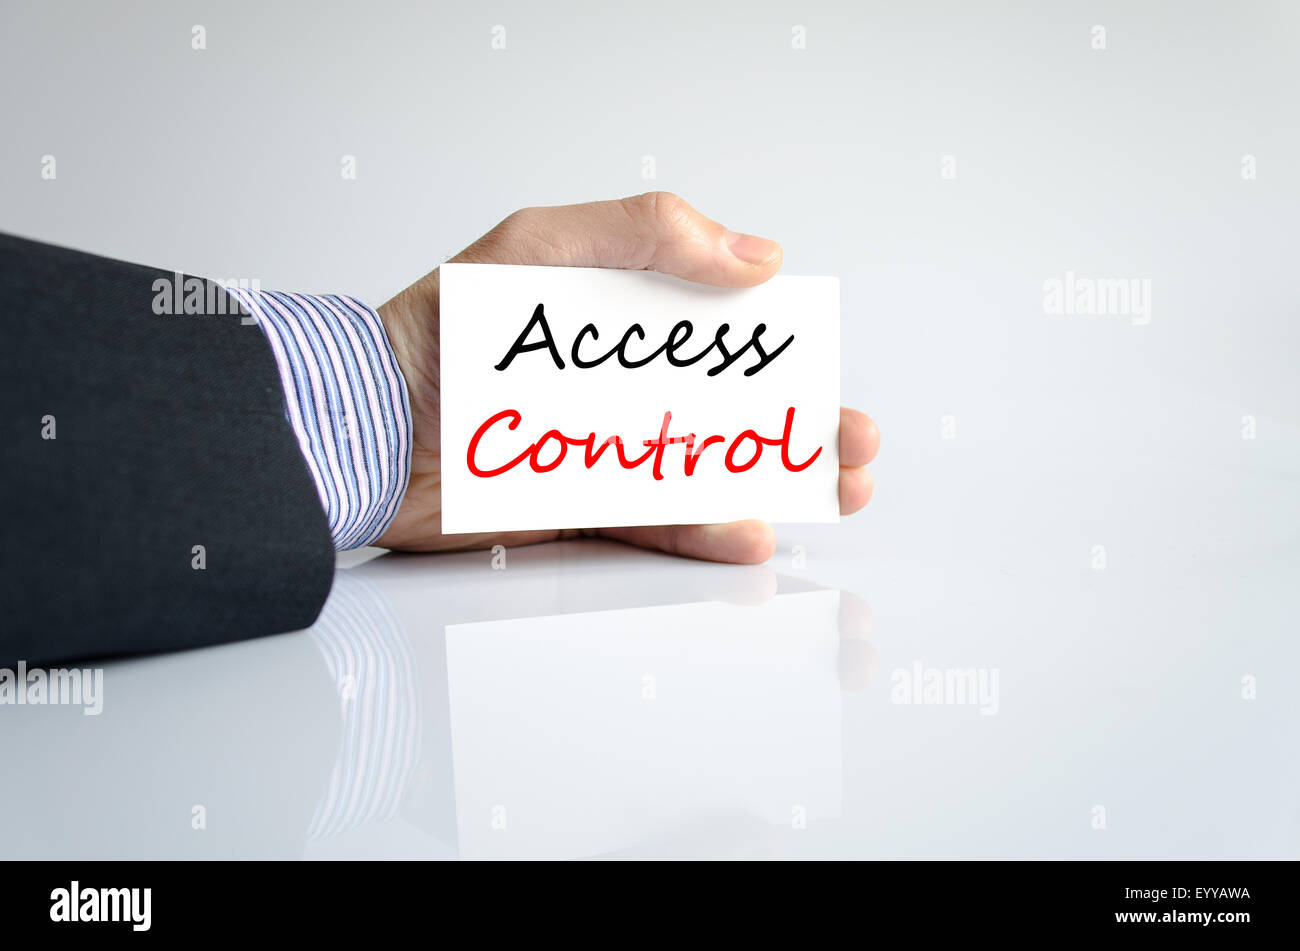 Access control text concept isolated over white background Stock Photo